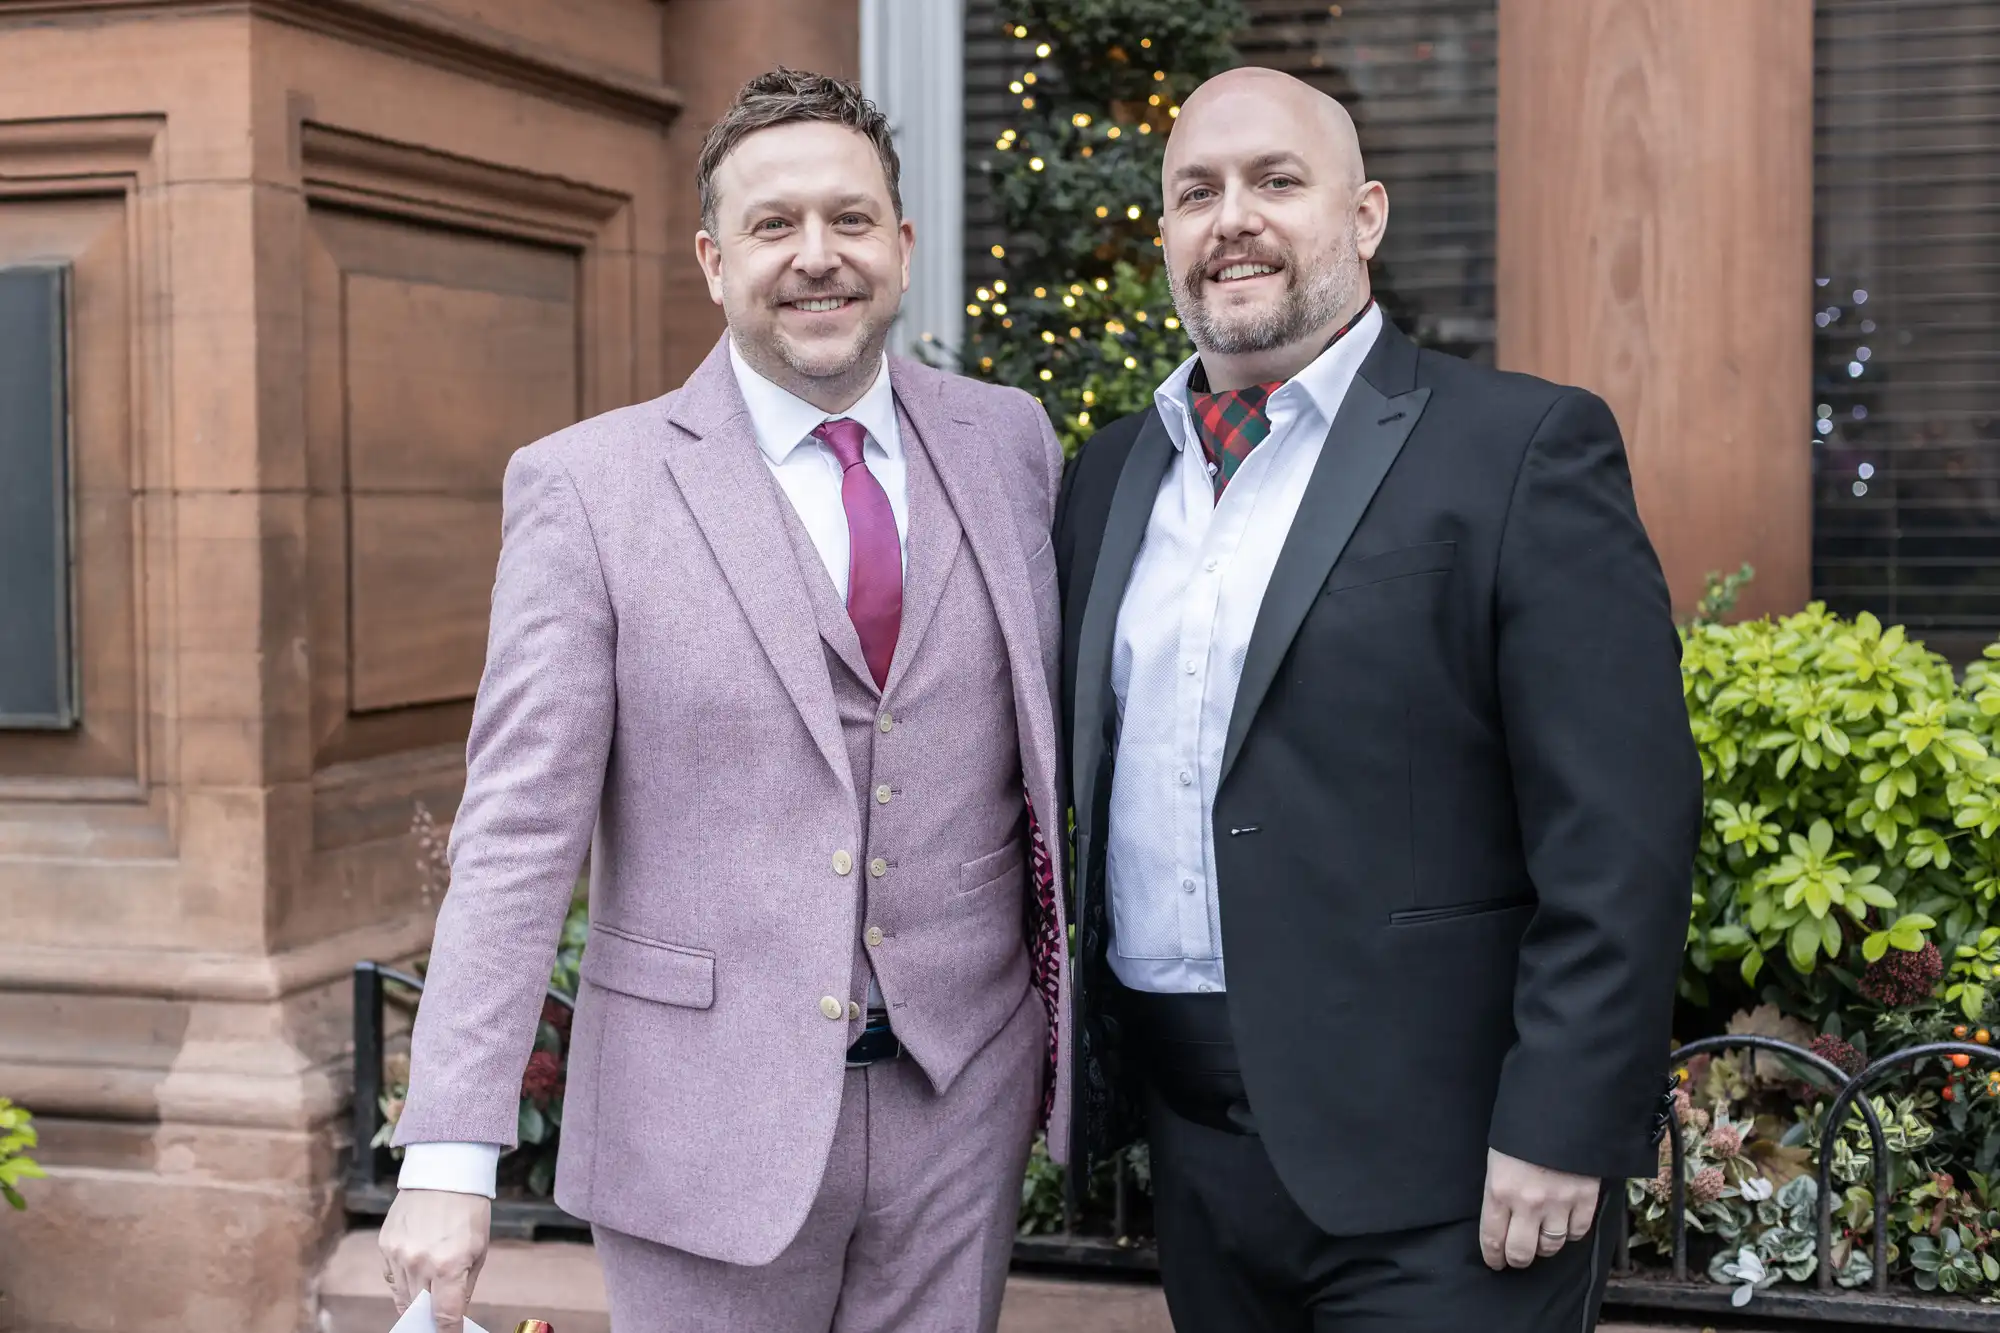 Two men standing side by side, one wearing a light pink suit with a red tie and the other in a dark suit with a patterned tie, in front of a building with plants and a decorated tree in the background.